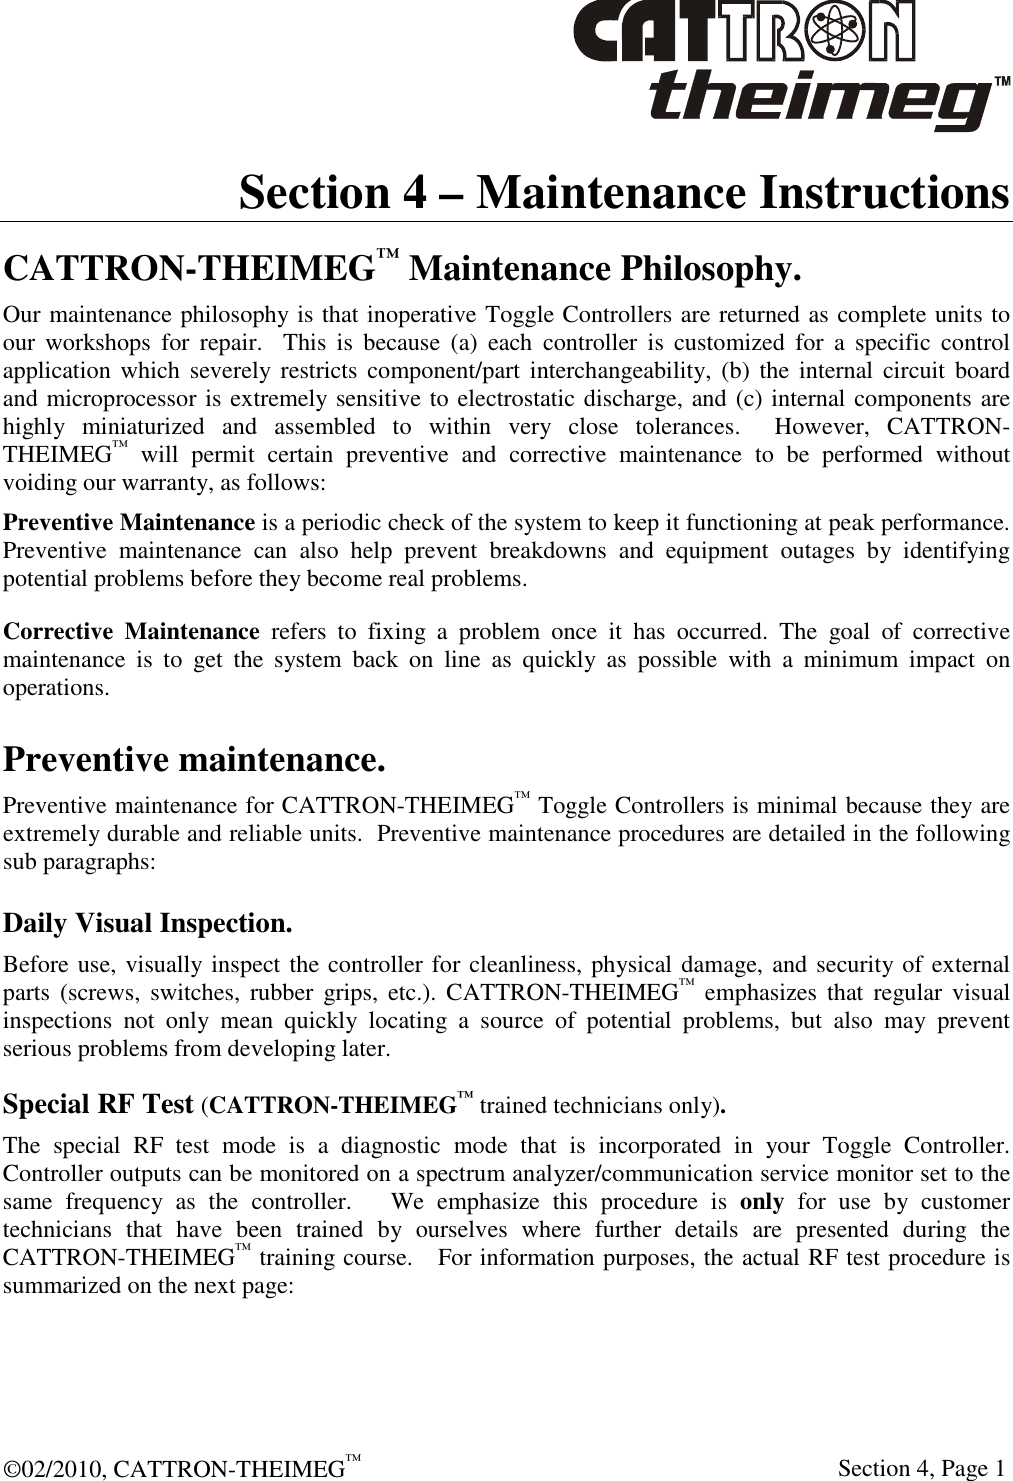  ©02/2010, CATTRON-THEIMEG™     Section 4, Page 1 Section 4 – Maintenance Instructions CATTRON-THEIMEG™ Maintenance Philosophy. Our maintenance philosophy is that inoperative Toggle Controllers are returned as complete units to our  workshops  for  repair.    This  is  because  (a)  each  controller  is  customized  for  a  specific  control application which  severely restricts component/part  interchangeability, (b)  the  internal circuit  board and microprocessor is extremely sensitive to electrostatic discharge, and (c) internal components are highly  miniaturized  and  assembled  to  within  very  close  tolerances.    However,  CATTRON-THEIMEG™  will  permit  certain  preventive  and  corrective  maintenance  to  be  performed  without voiding our warranty, as follows:   Preventive Maintenance is a periodic check of the system to keep it functioning at peak performance. Preventive  maintenance  can  also  help  prevent  breakdowns  and  equipment  outages  by  identifying potential problems before they become real problems.  Corrective  Maintenance  refers  to  fixing  a  problem  once  it  has  occurred.  The  goal  of  corrective maintenance  is  to  get  the  system  back  on  line  as  quickly  as  possible  with  a  minimum  impact  on operations. Preventive maintenance. Preventive maintenance for CATTRON-THEIMEG™ Toggle Controllers is minimal because they are extremely durable and reliable units.  Preventive maintenance procedures are detailed in the following sub paragraphs: Daily Visual Inspection. Before use, visually inspect the controller for cleanliness, physical damage, and security of external parts  (screws,  switches,  rubber  grips,  etc.).  CATTRON-THEIMEG™  emphasizes  that  regular  visual inspections  not  only  mean  quickly  locating  a  source  of  potential  problems,  but  also  may  prevent serious problems from developing later. Special RF Test (CATTRON-THEIMEG™ trained technicians only). The  special  RF  test  mode  is  a  diagnostic  mode  that  is  incorporated  in  your  Toggle  Controller.  Controller outputs can be monitored on a spectrum analyzer/communication service monitor set to the same  frequency  as  the  controller.      We  emphasize  this  procedure  is  only  for  use  by  customer technicians  that  have  been  trained  by  ourselves  where  further  details  are  presented  during  the CATTRON-THEIMEG™ training course.   For information purposes, the actual RF test procedure is summarized on the next page:   